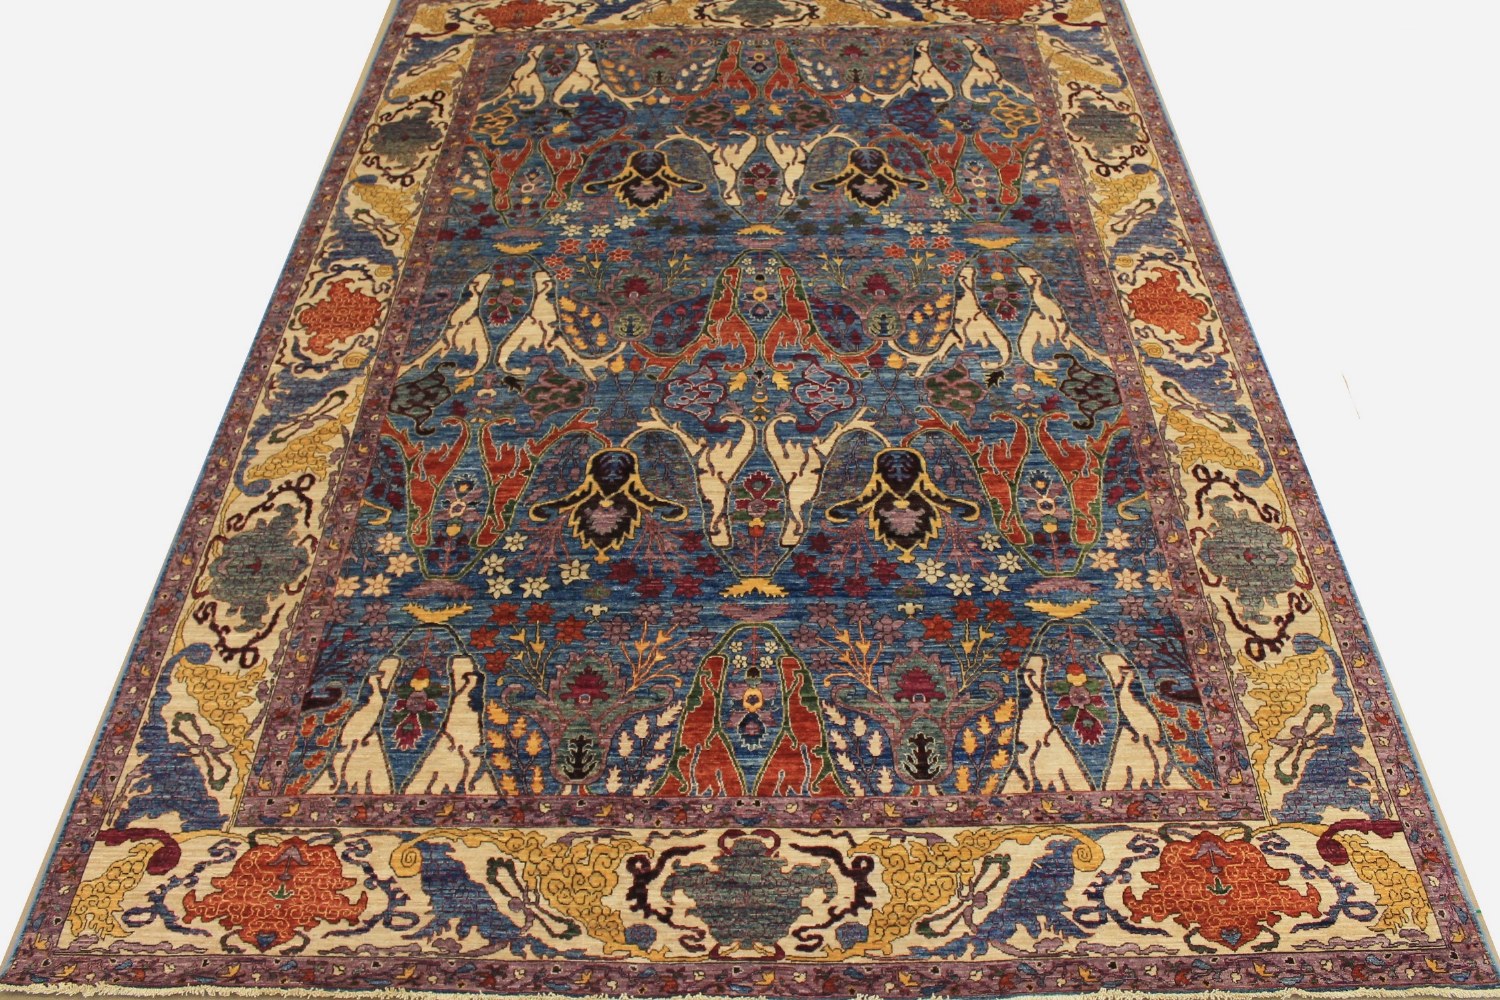 10x14 Antique Revival Hand Knotted Wool Area Rug - MR024991